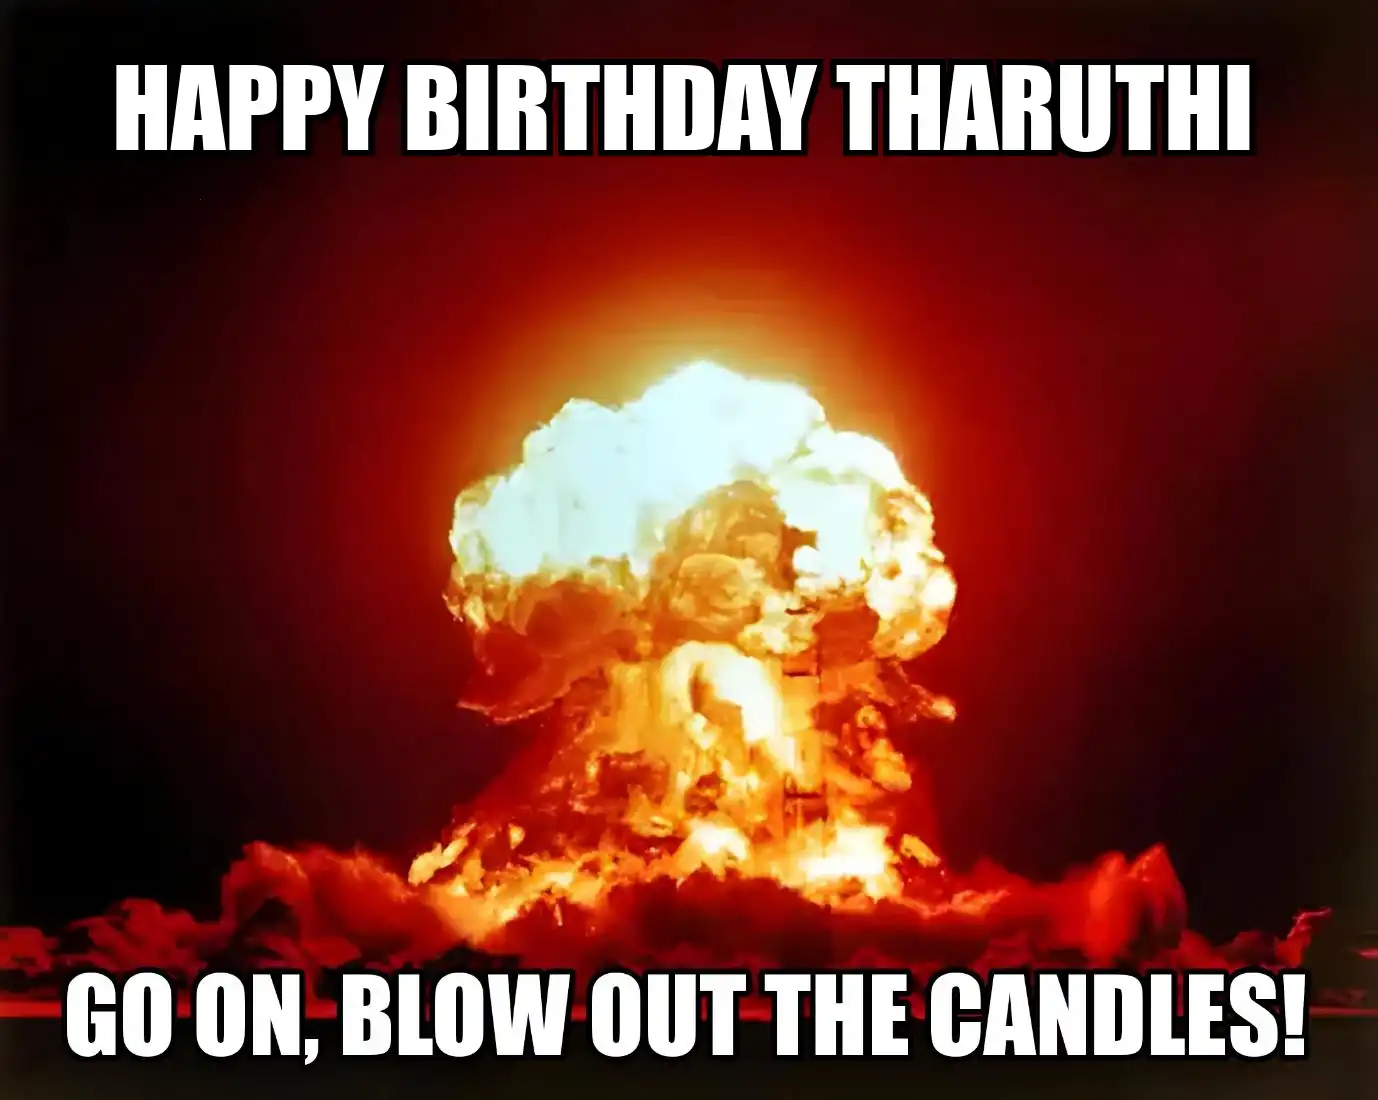 Happy Birthday Tharuthi Go On Blow Out The Candles Meme